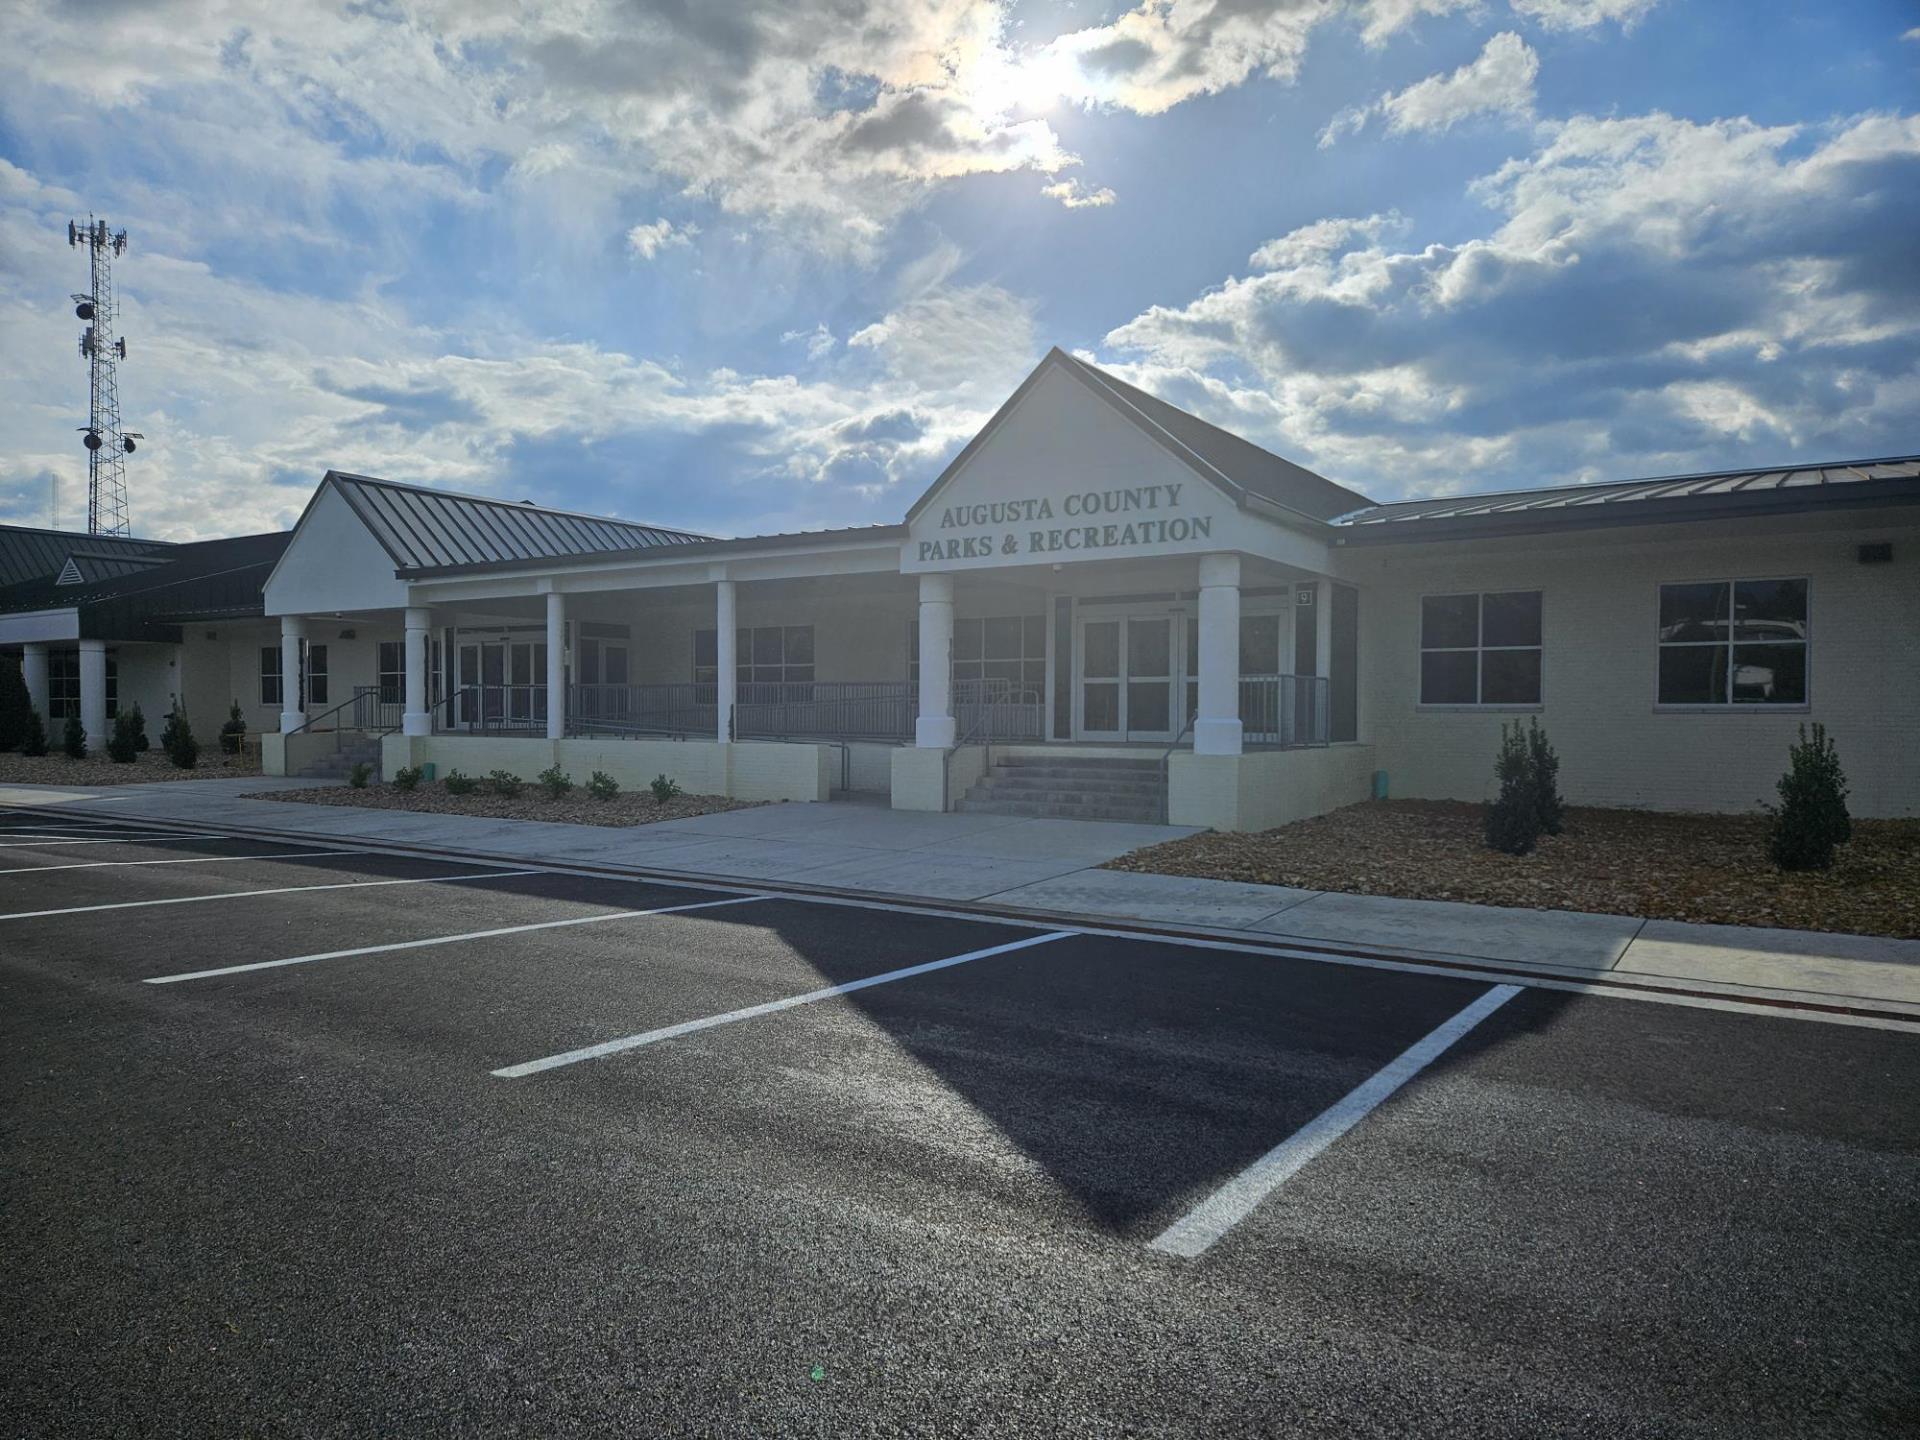 New Augusta County Parks and Recreation entrance